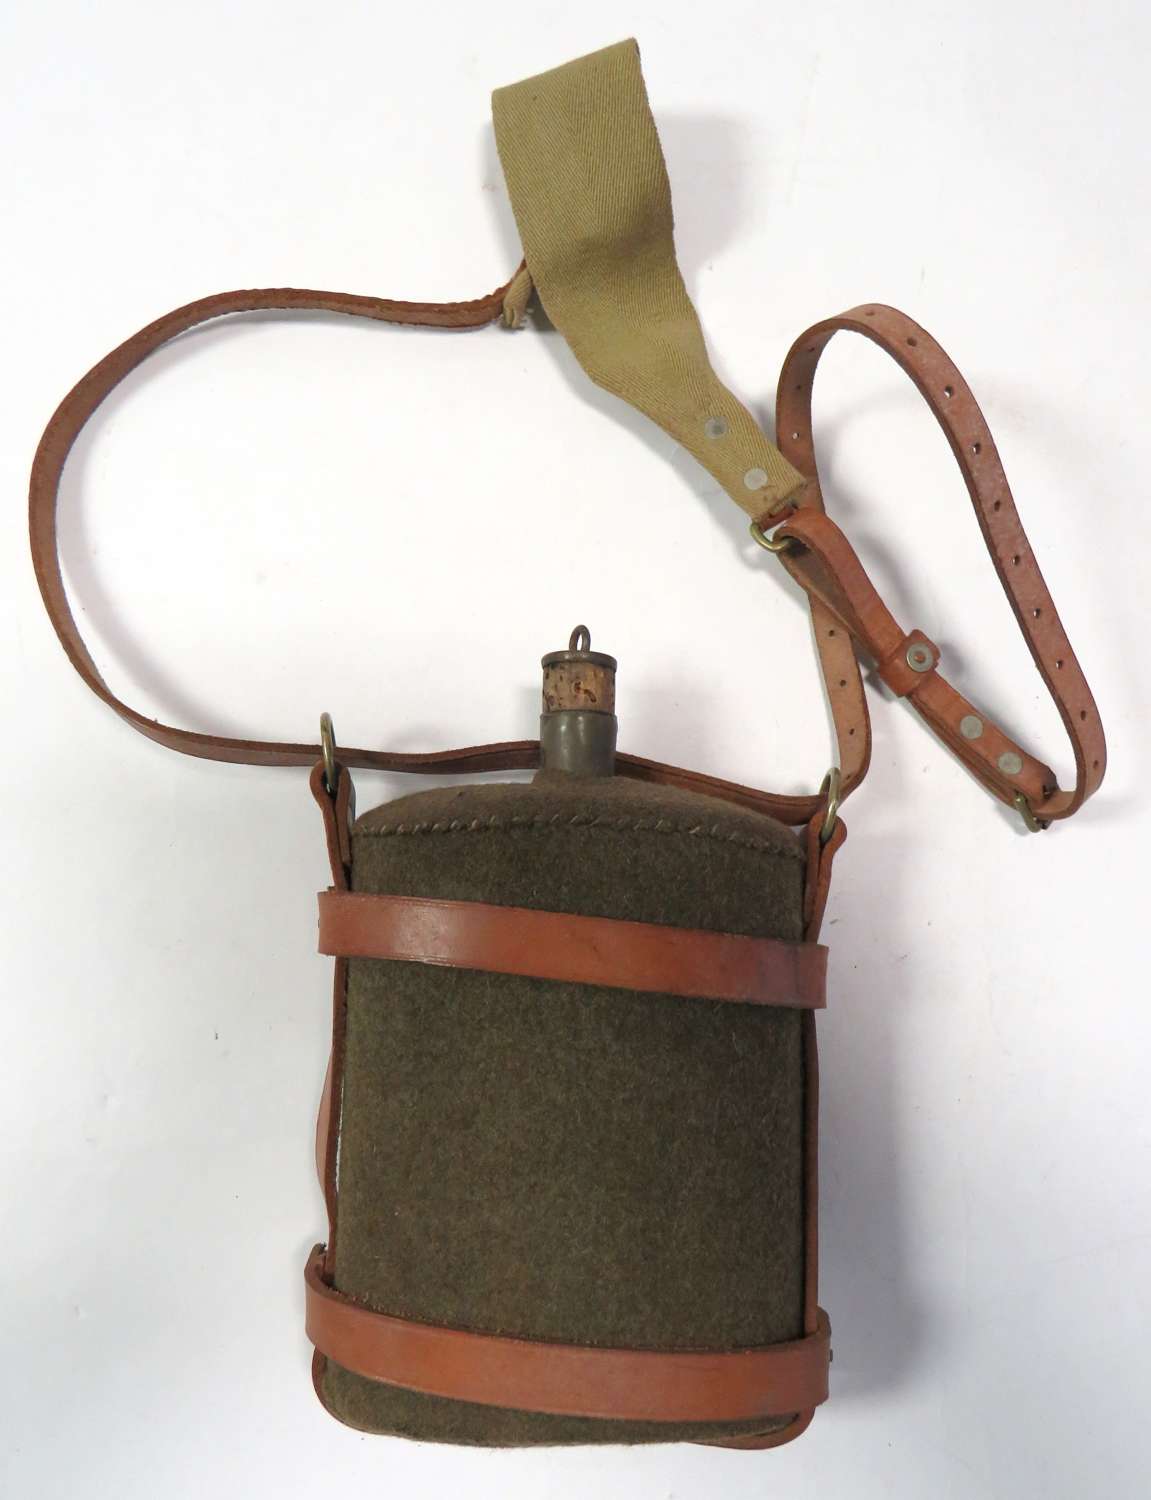 WW2 Home Guard Pattern Water bottle and Harness